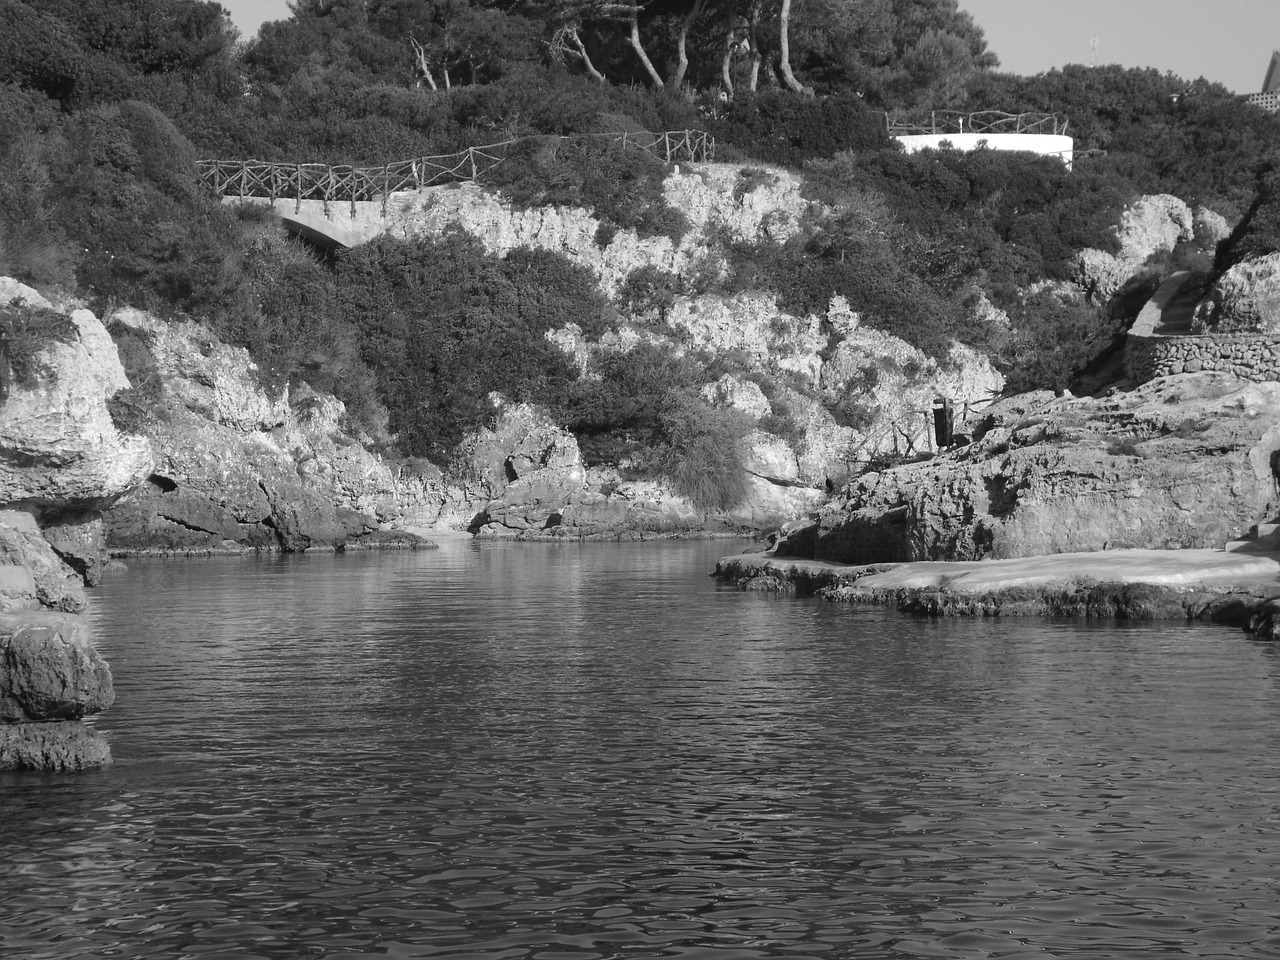 Black and white,sea,beach,menorca,free pictures - free image from ...